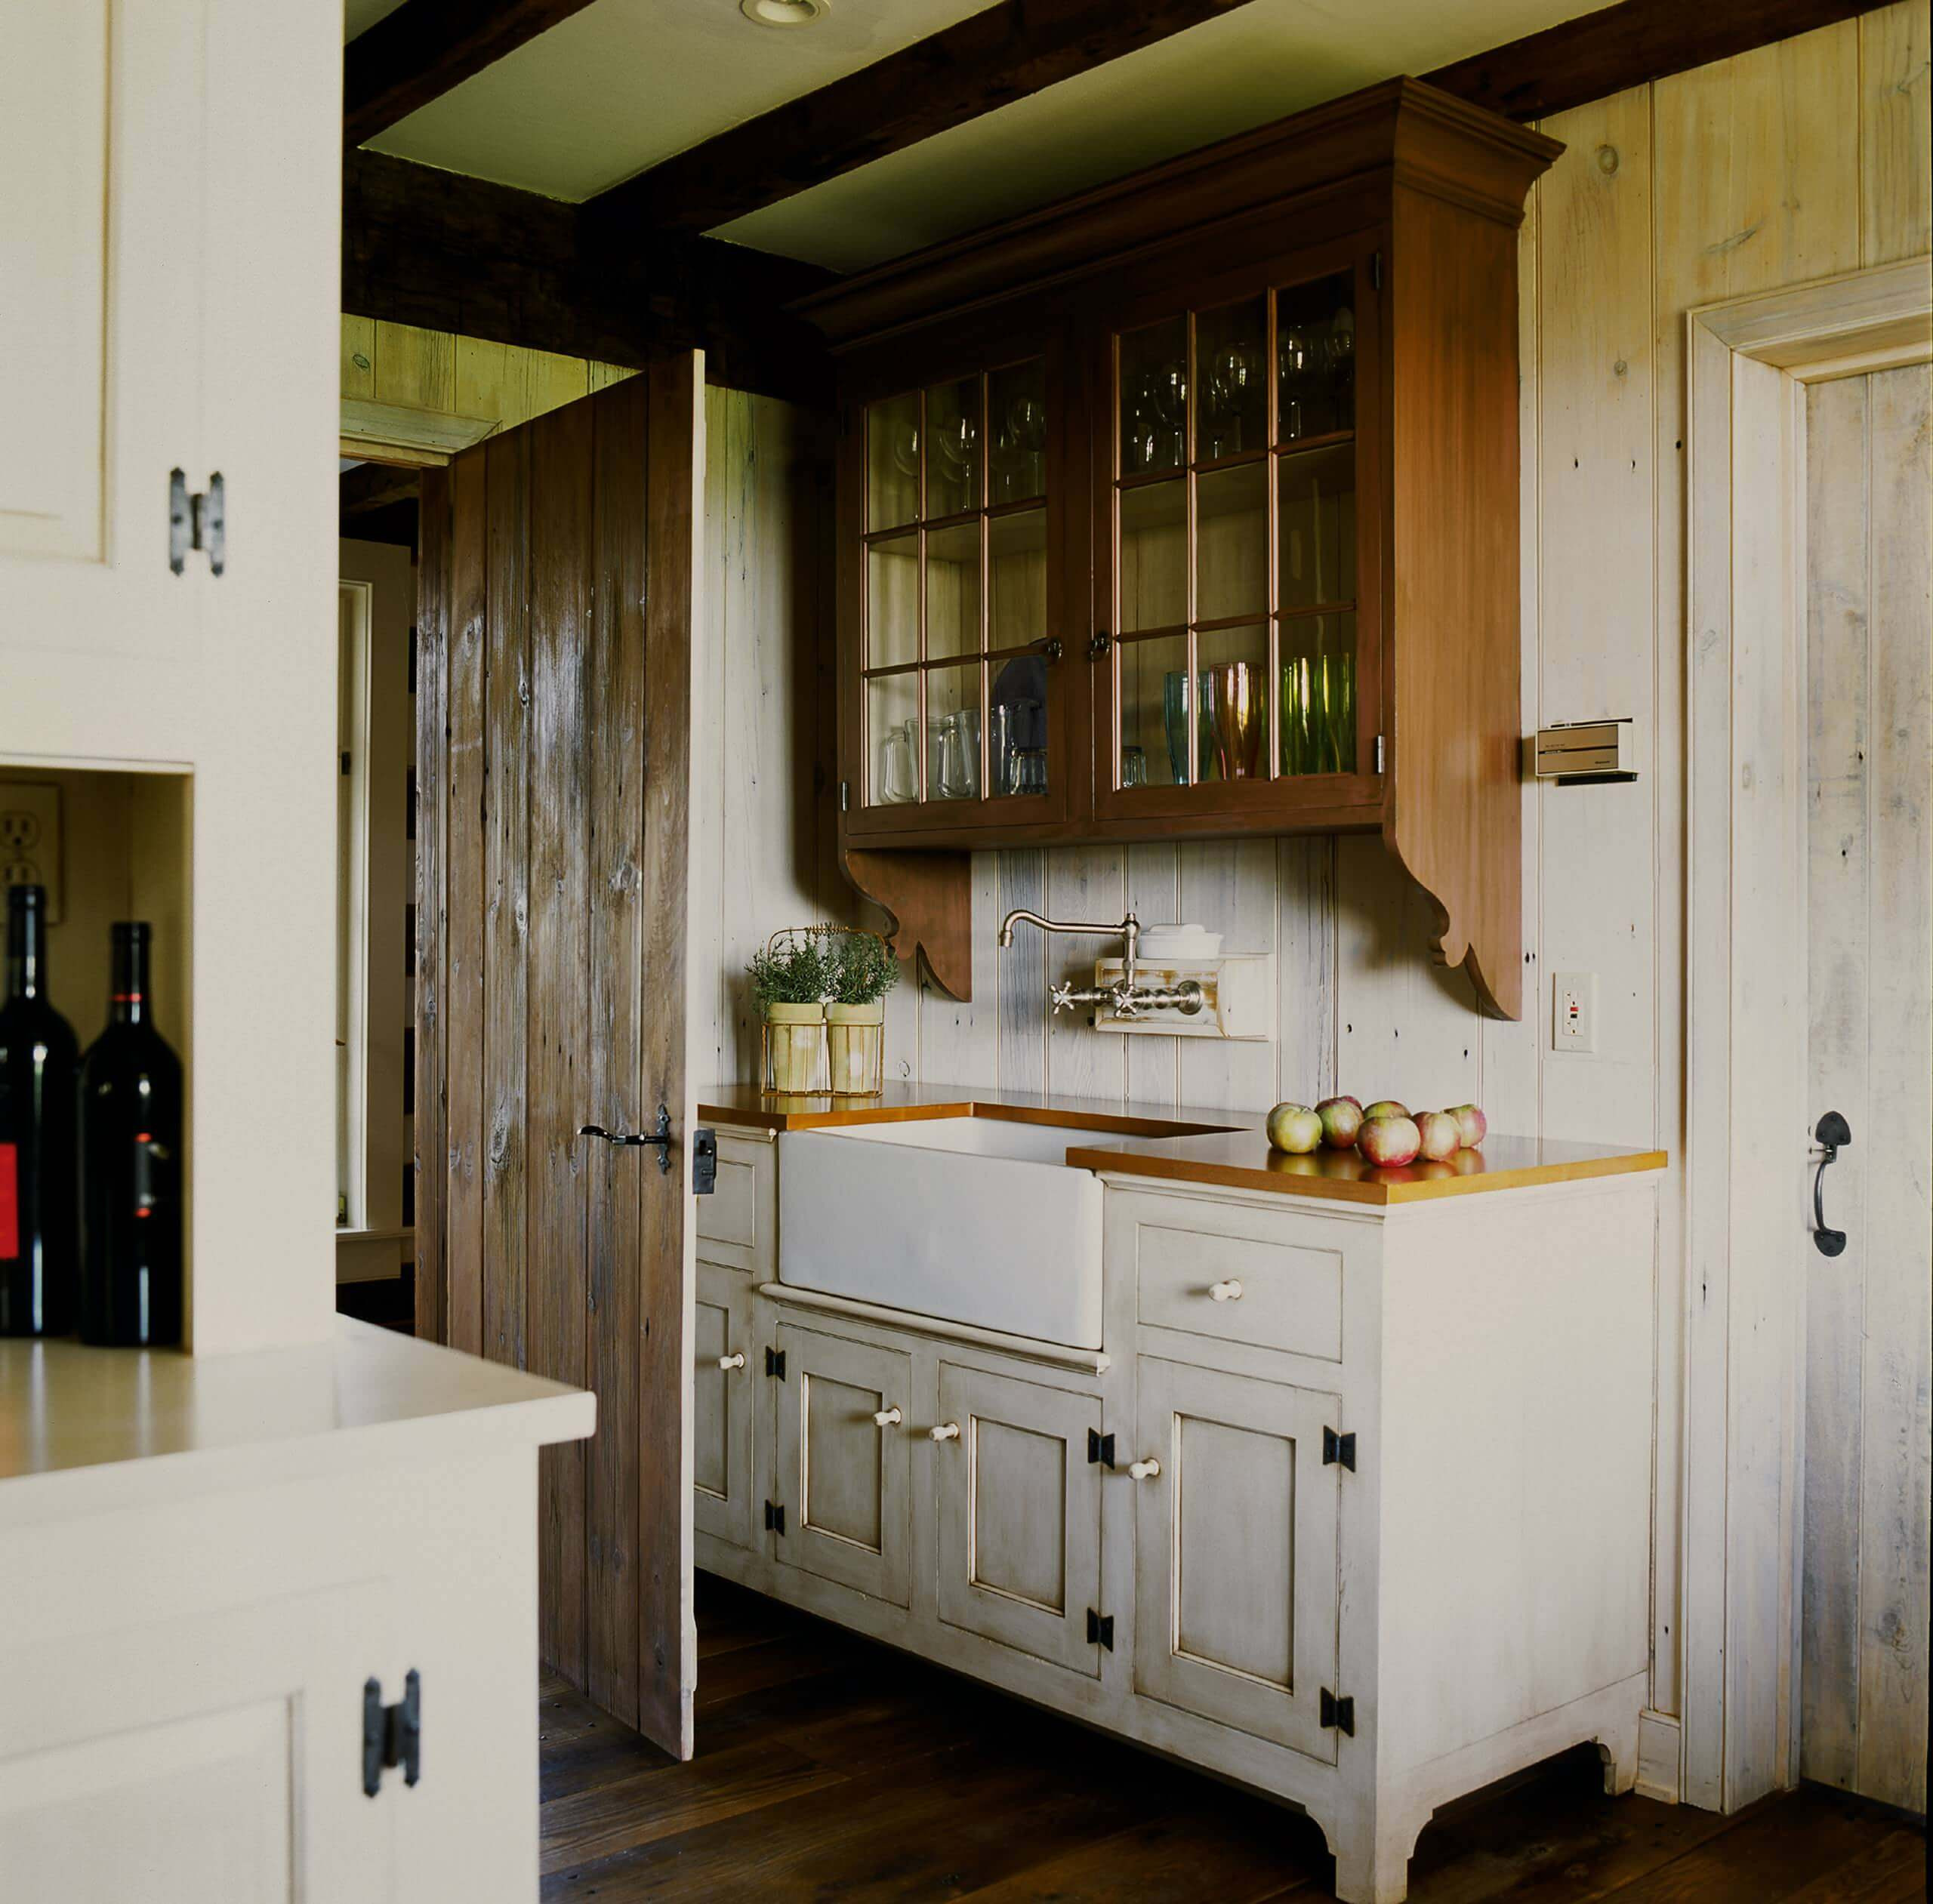 Rustic Kitchen Colors
 23 Best Ideas of Rustic Kitchen Cabinet You ll Want to Copy